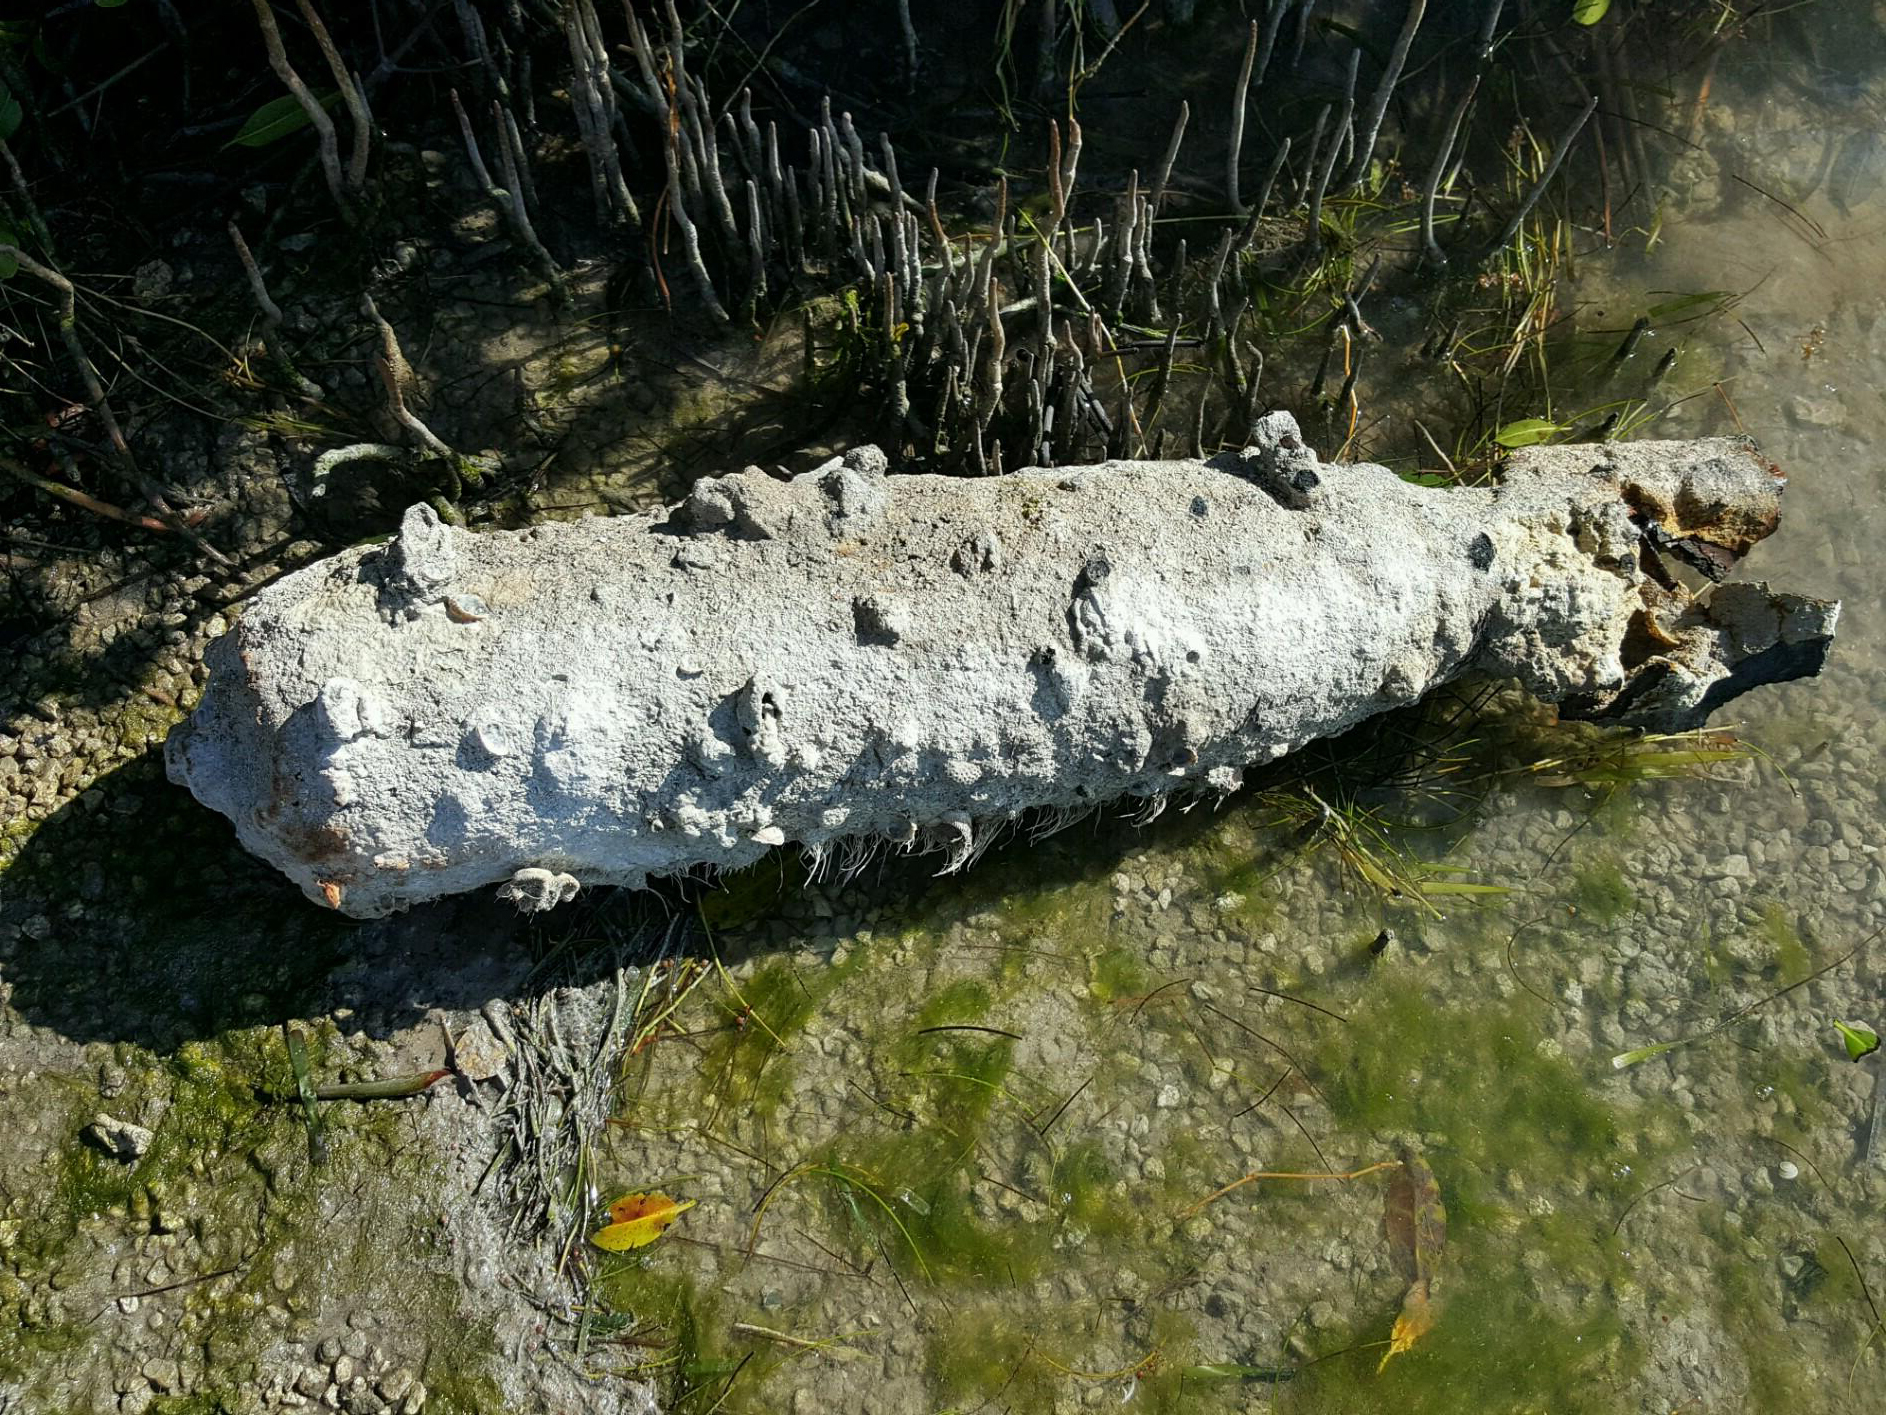 Possible Old Military Device Found Near Knight’s Key